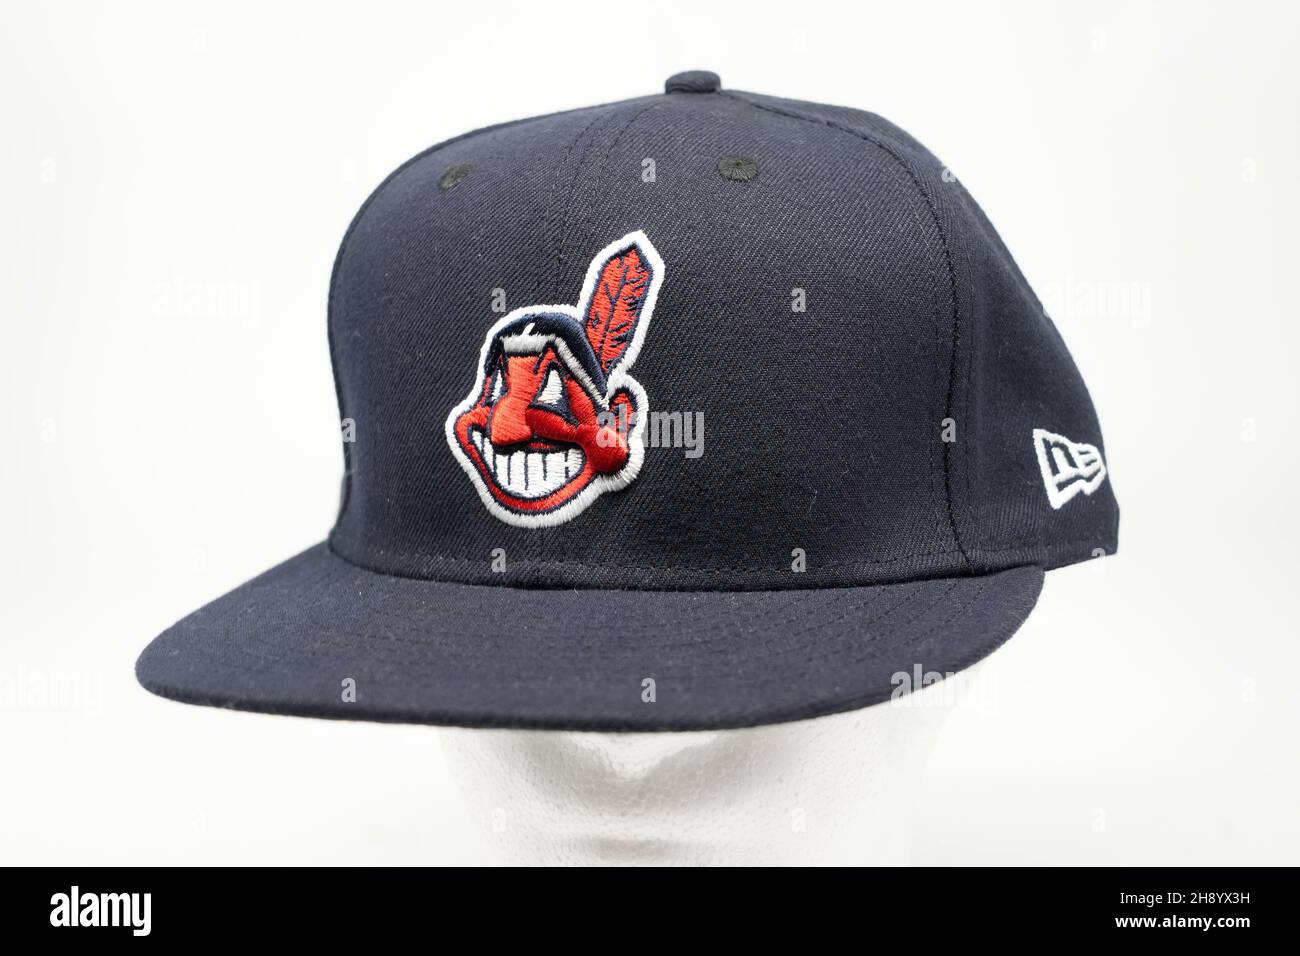 A Cleveland Indians baseball cap with a Chief Wahoo logo, Thursday